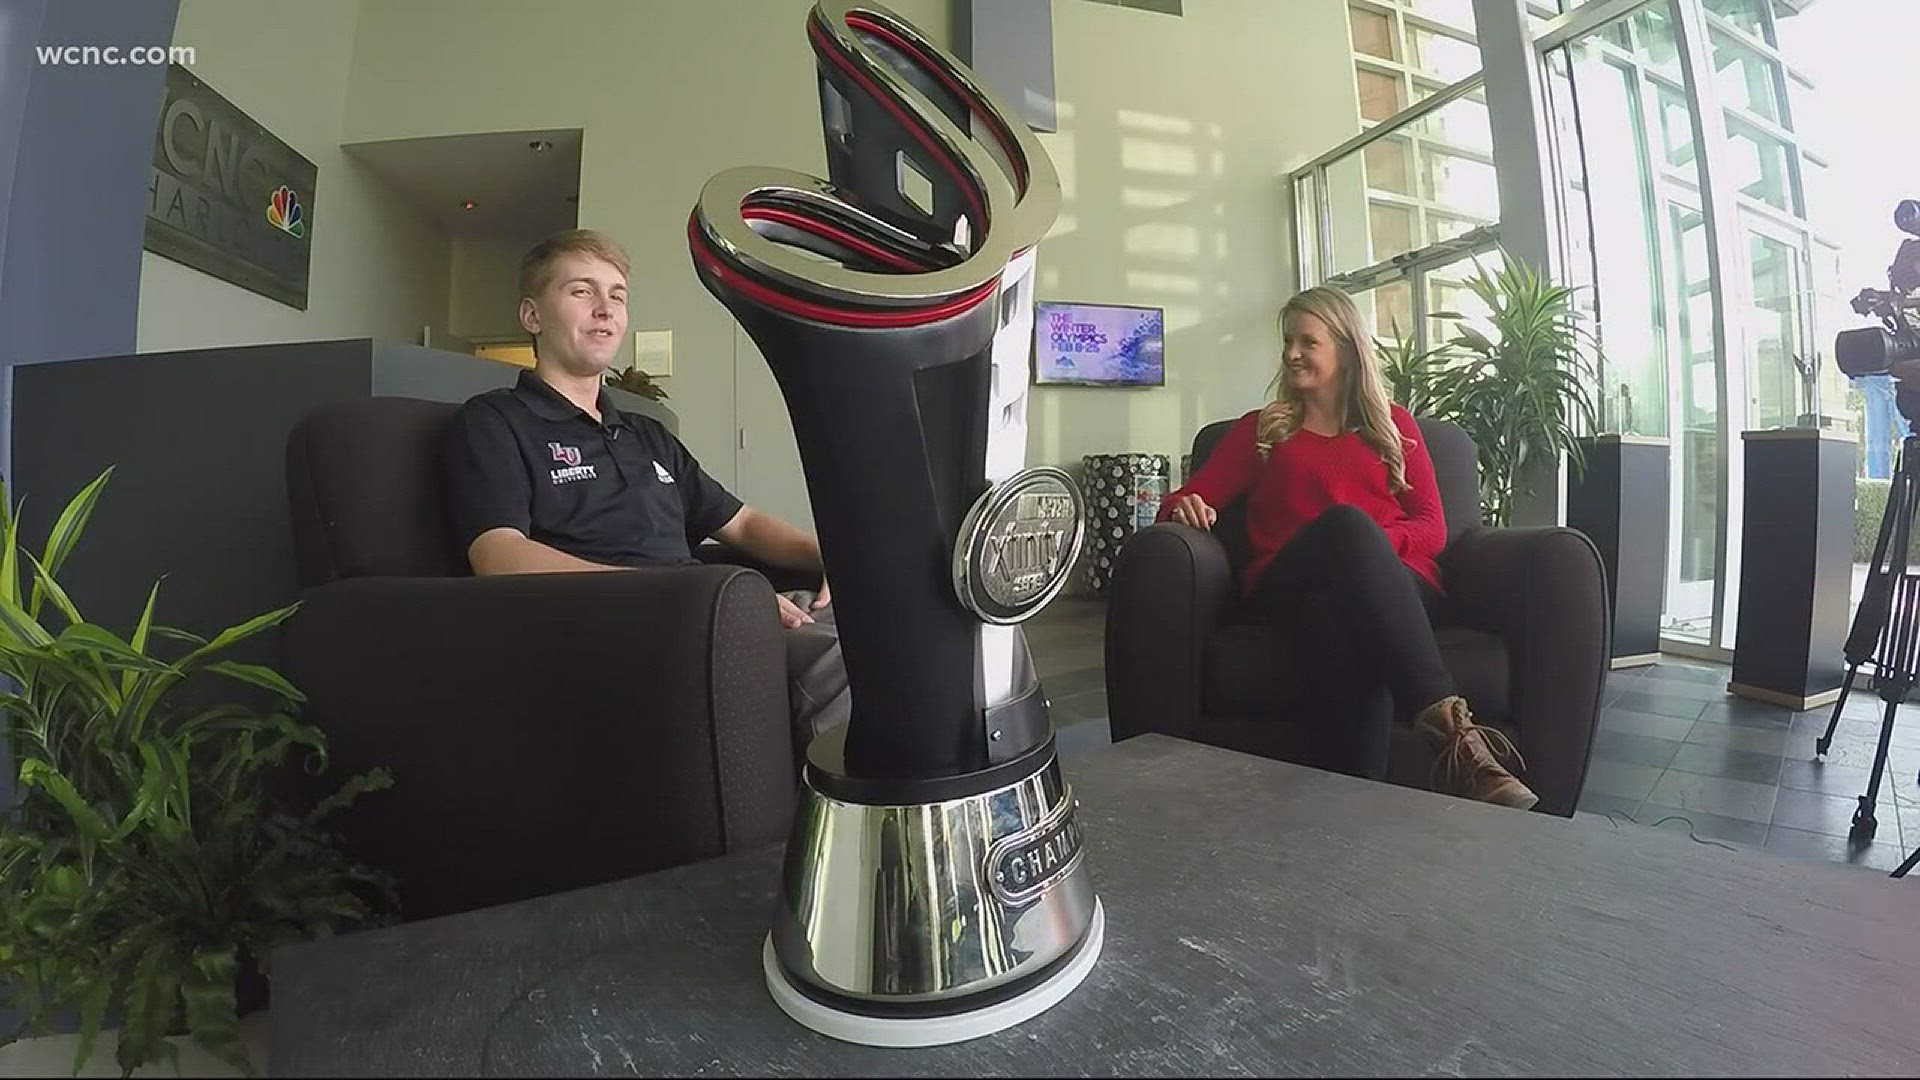 NBC Charlotte's Kelsey Riggs sat down with William Byron to talk about his championship weekend